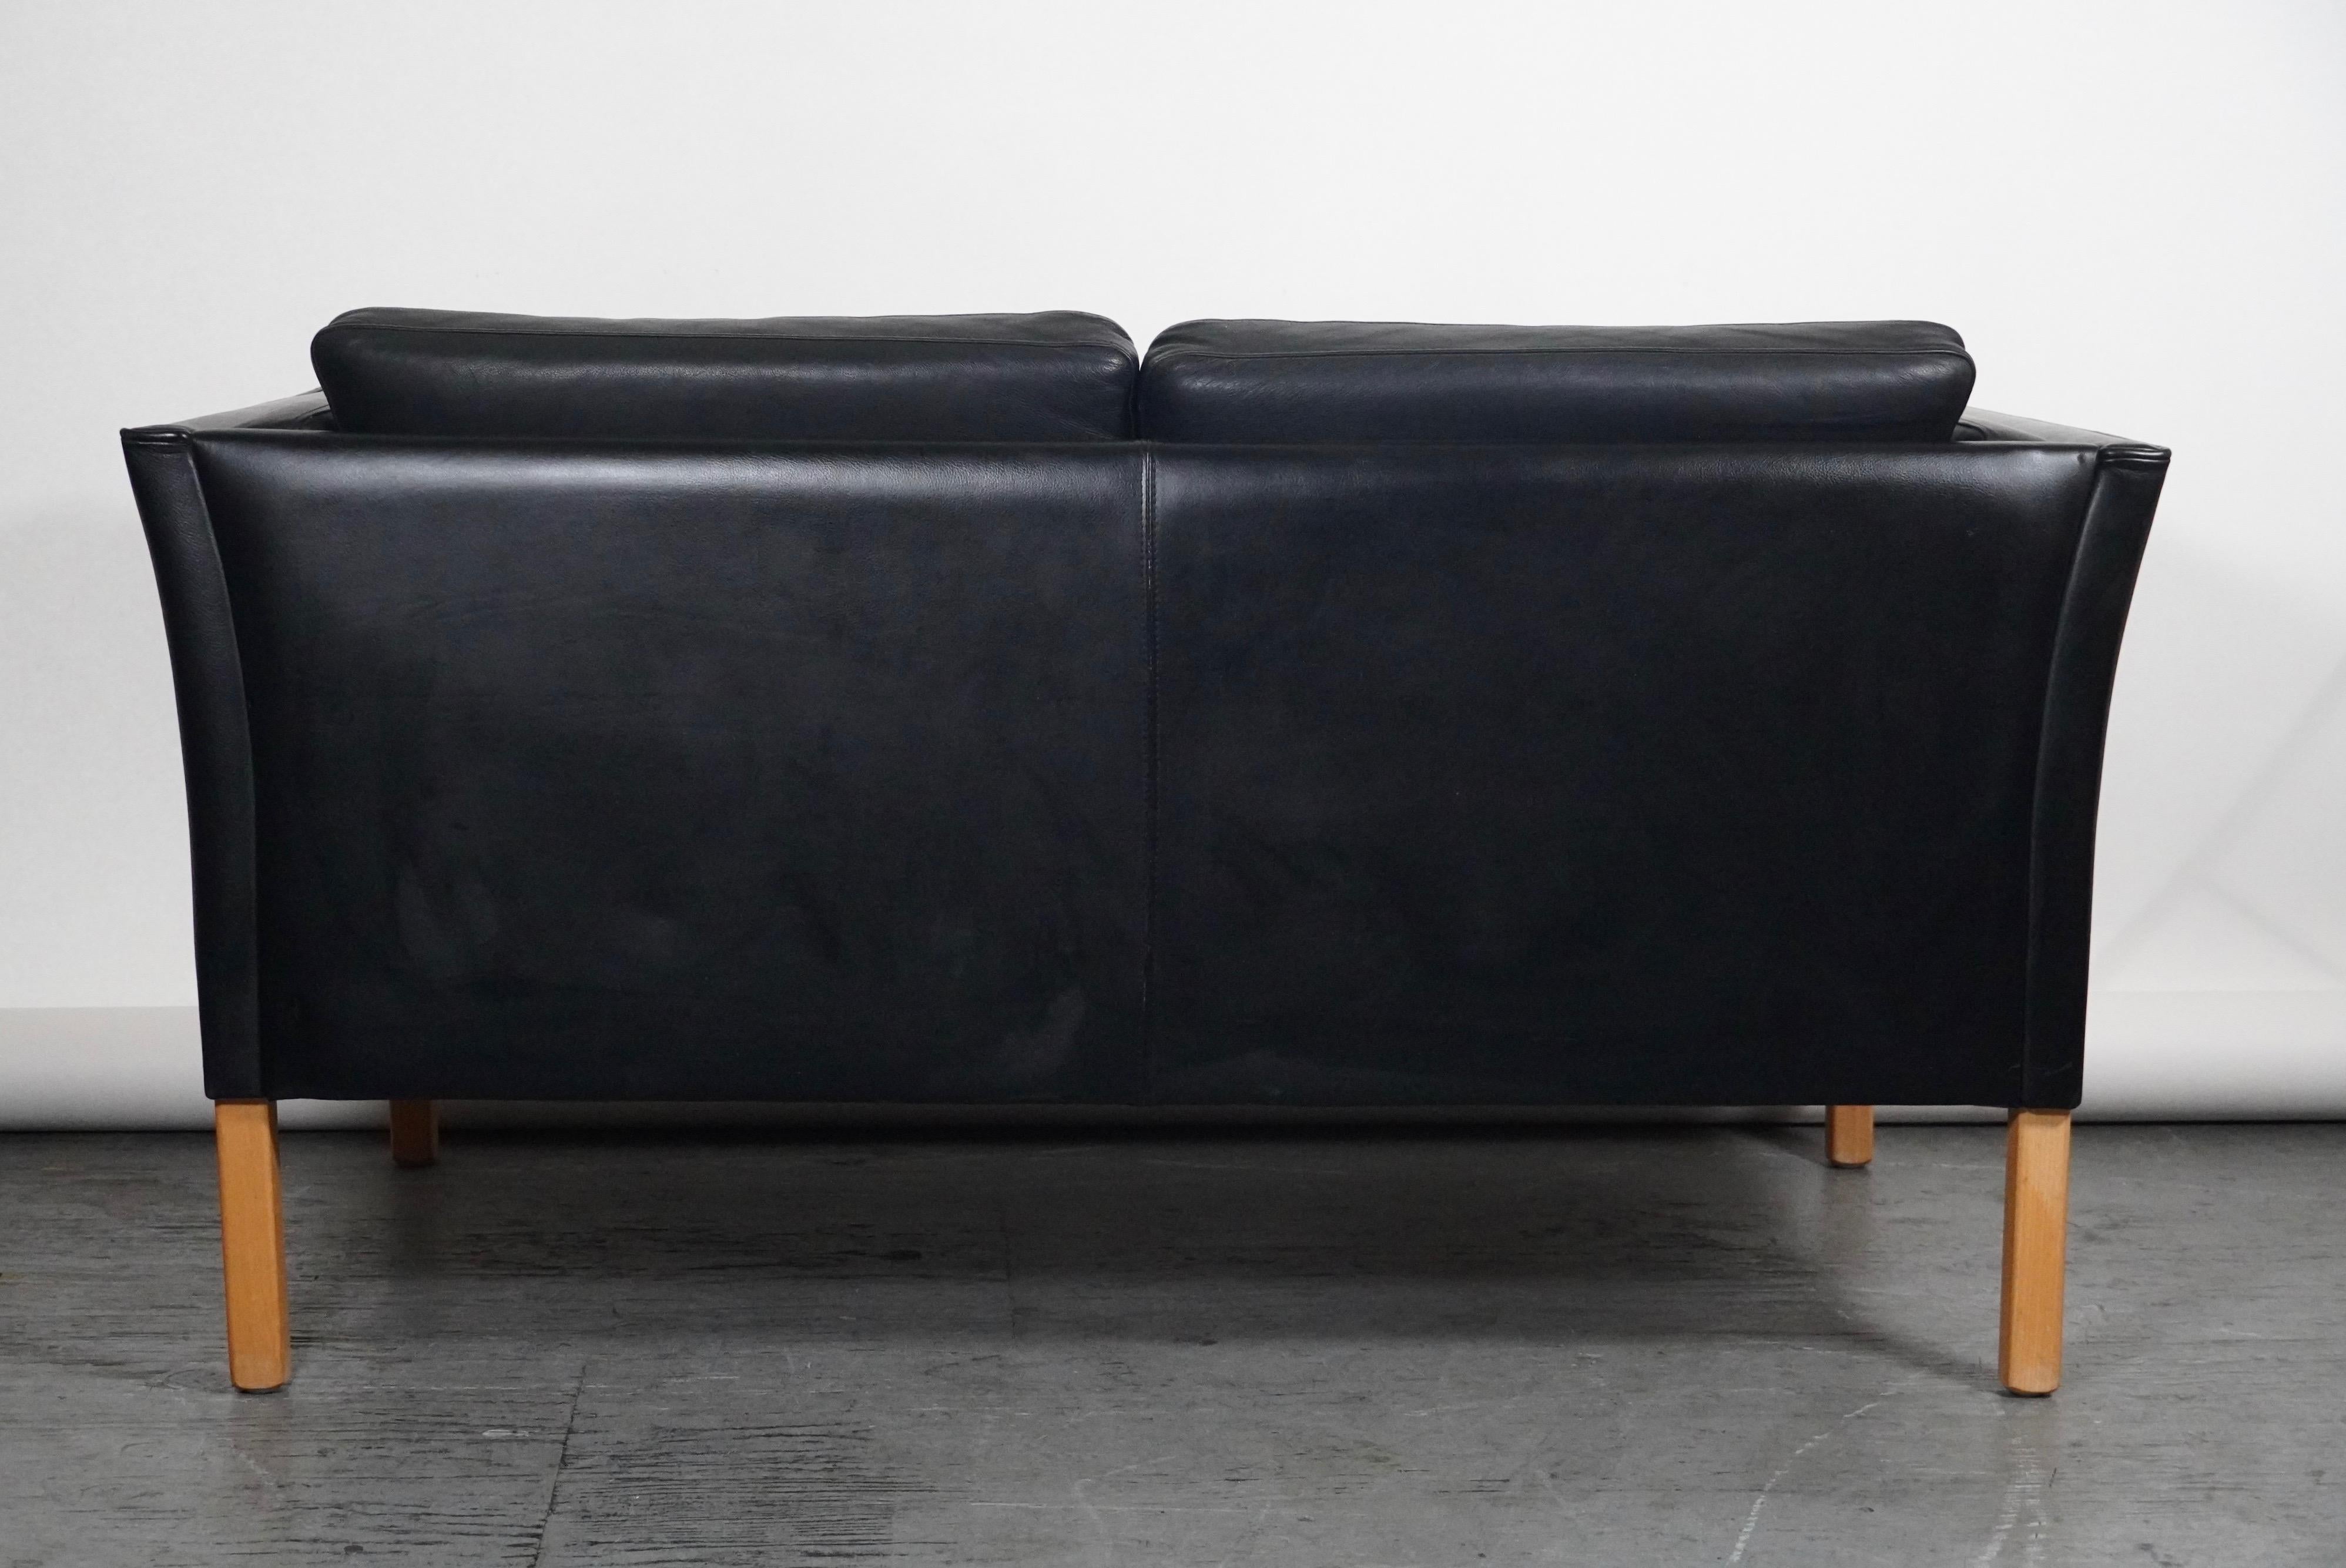 Late 20th Century Black Lather Borge Mogensen Style Sofa / Settee by Stouby of Denmark